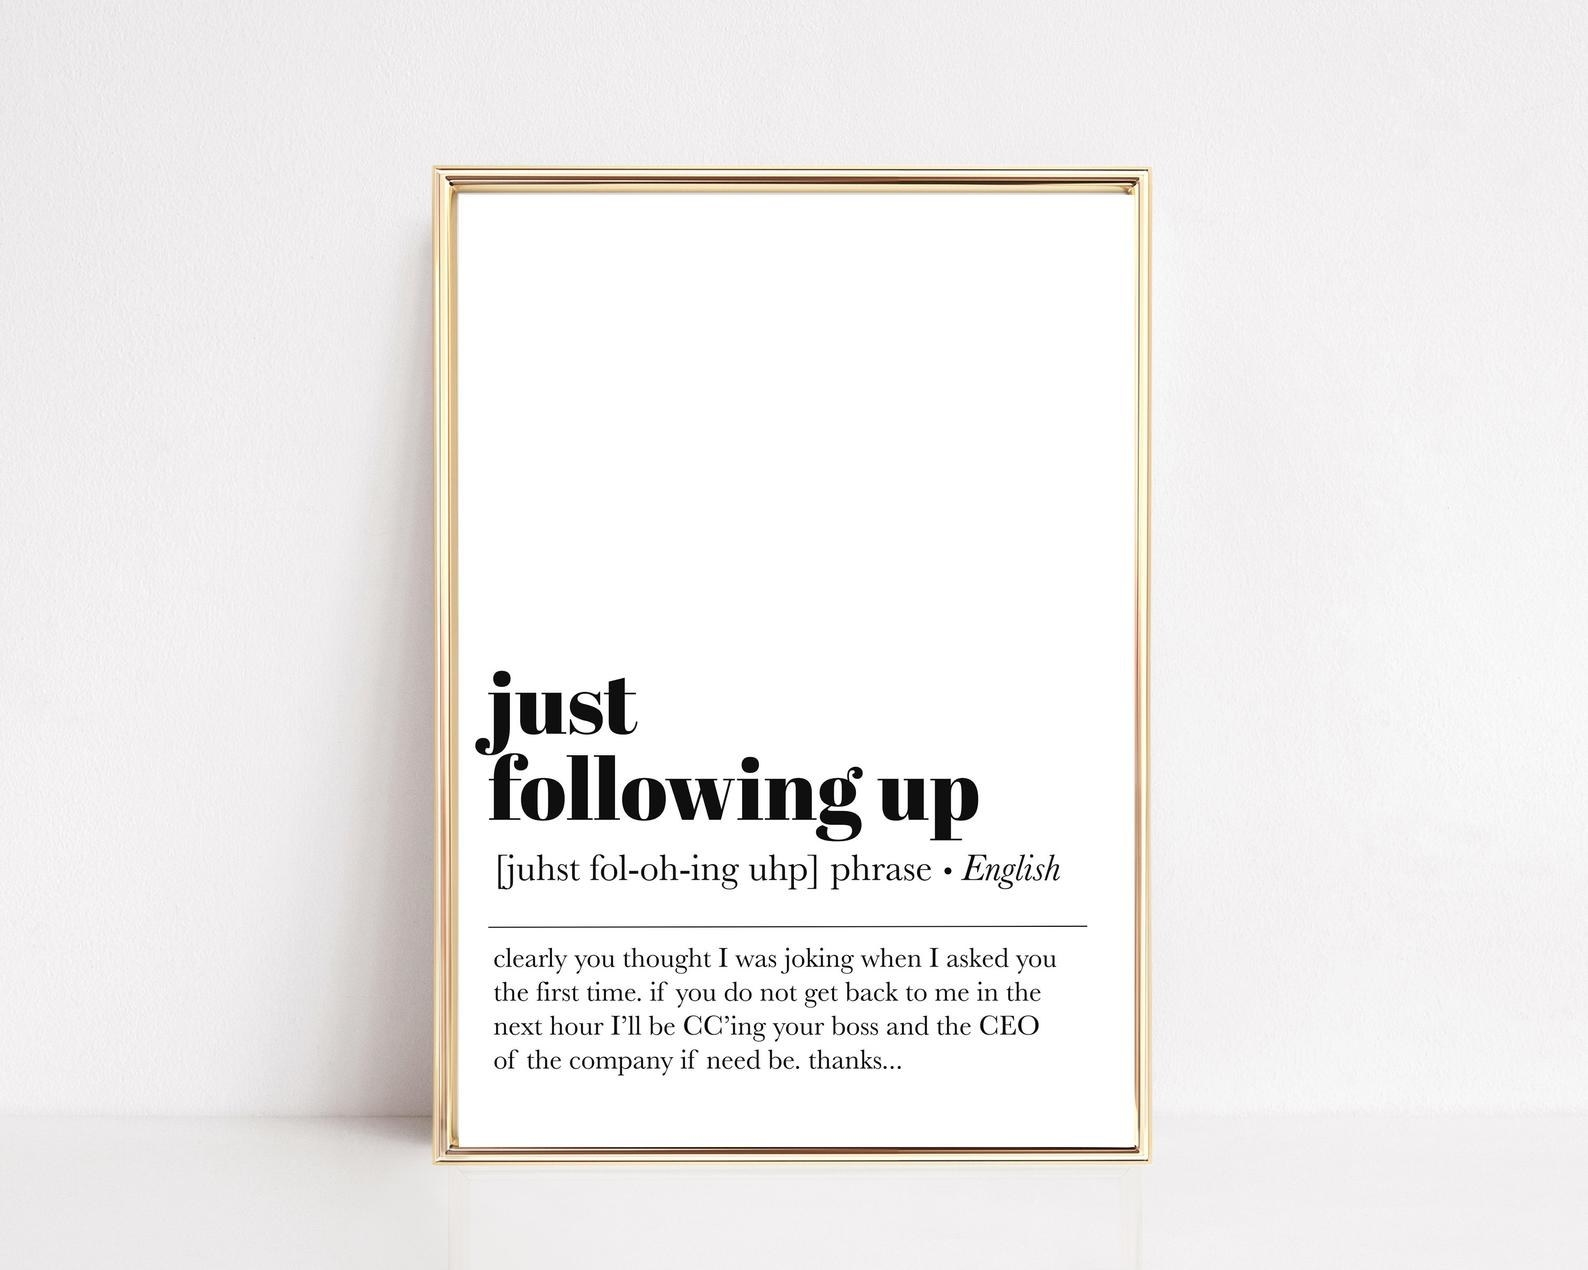 Another print that says &quot;just following up&quot; with the definition &quot;clearly you thought I was joking when I asked you the first time&quot; 